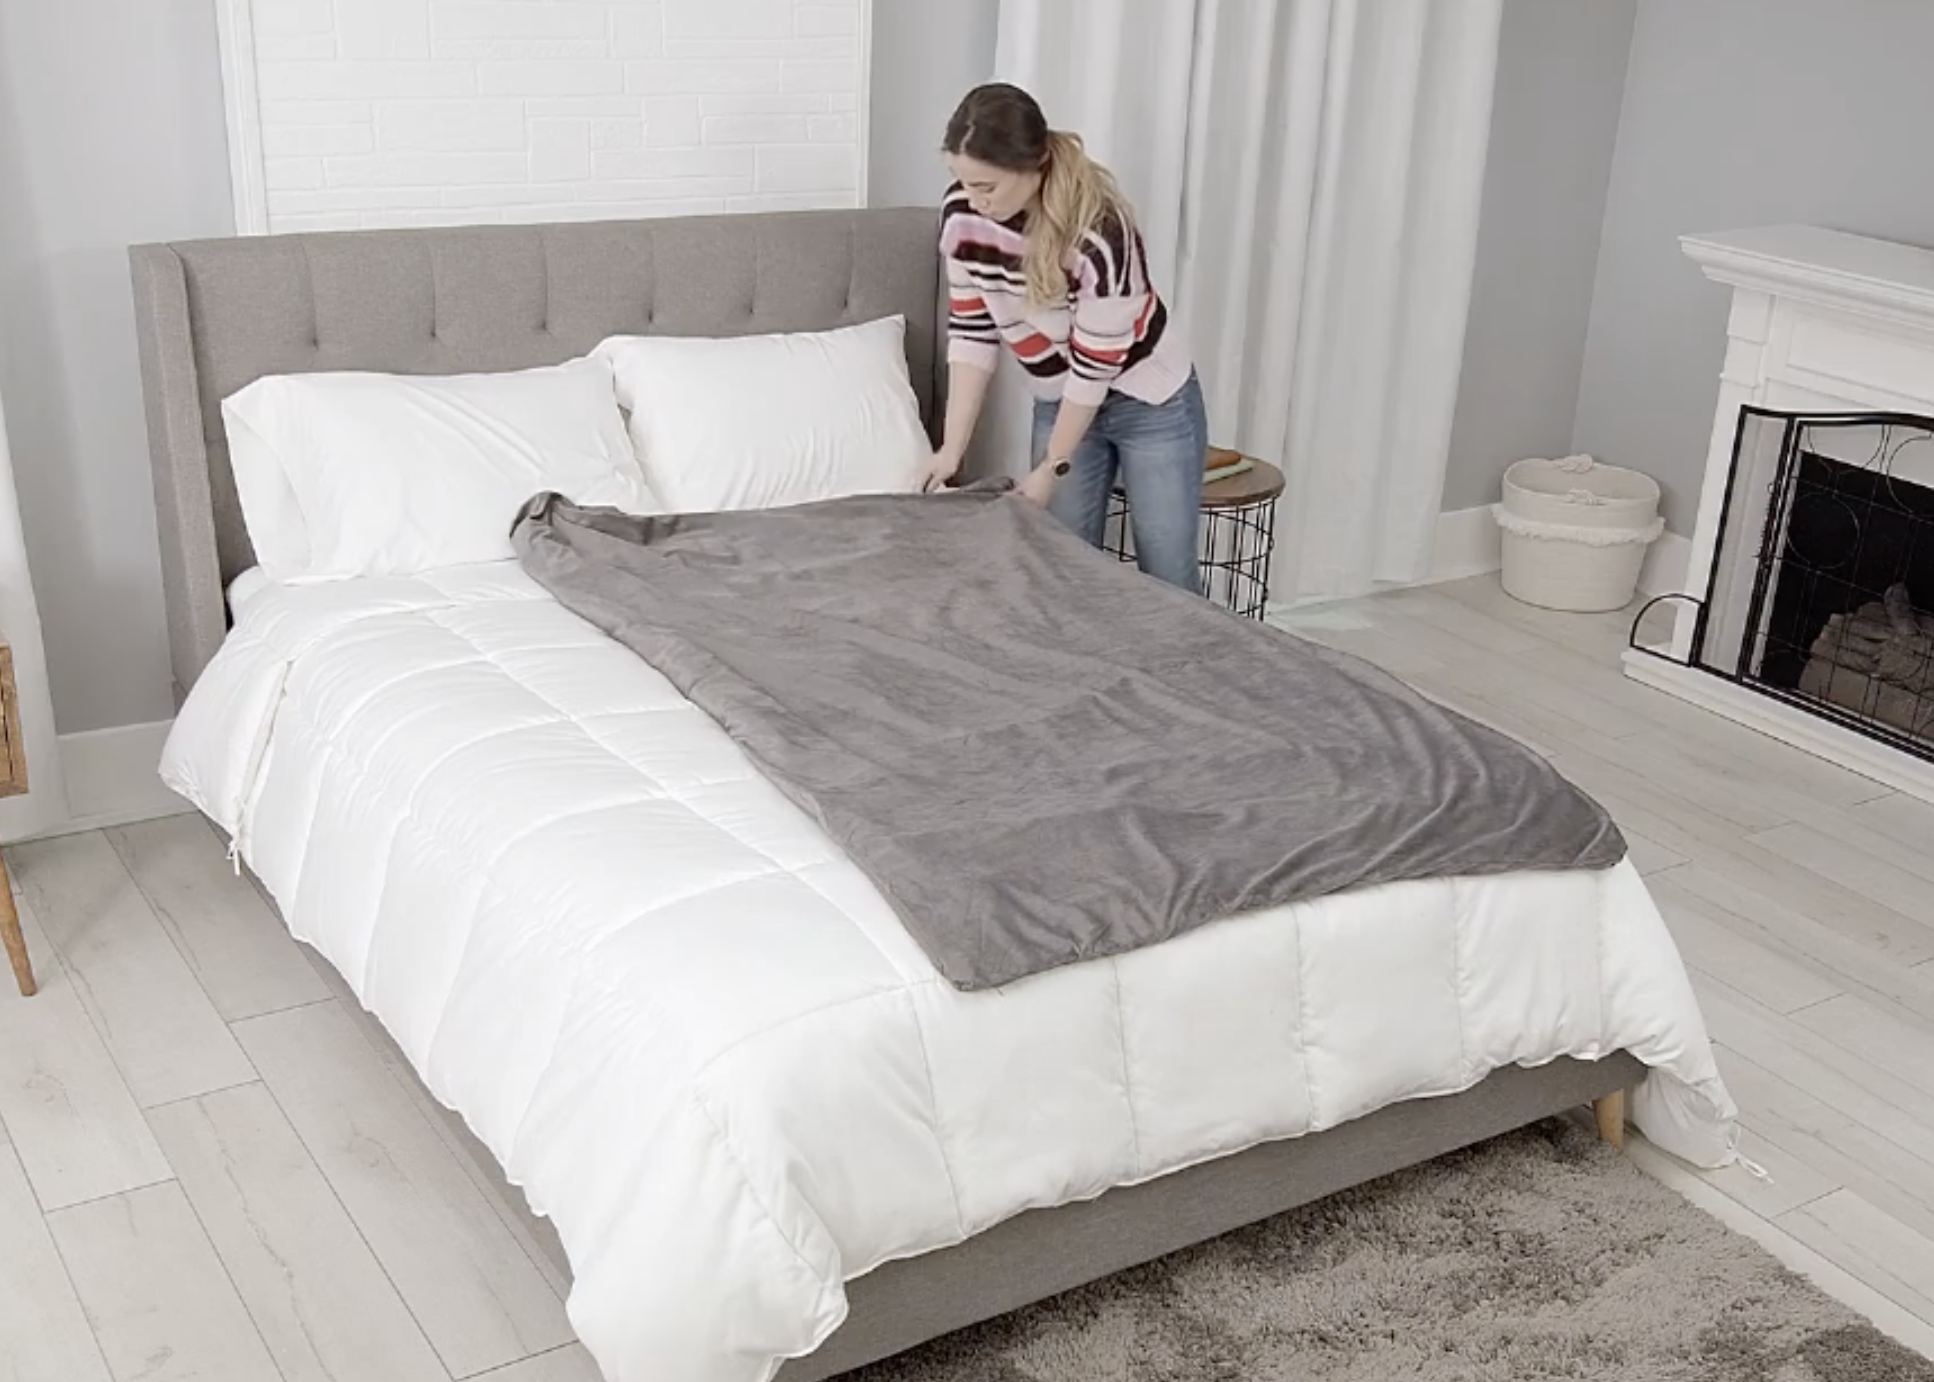 model putting the gray blanket on a bed